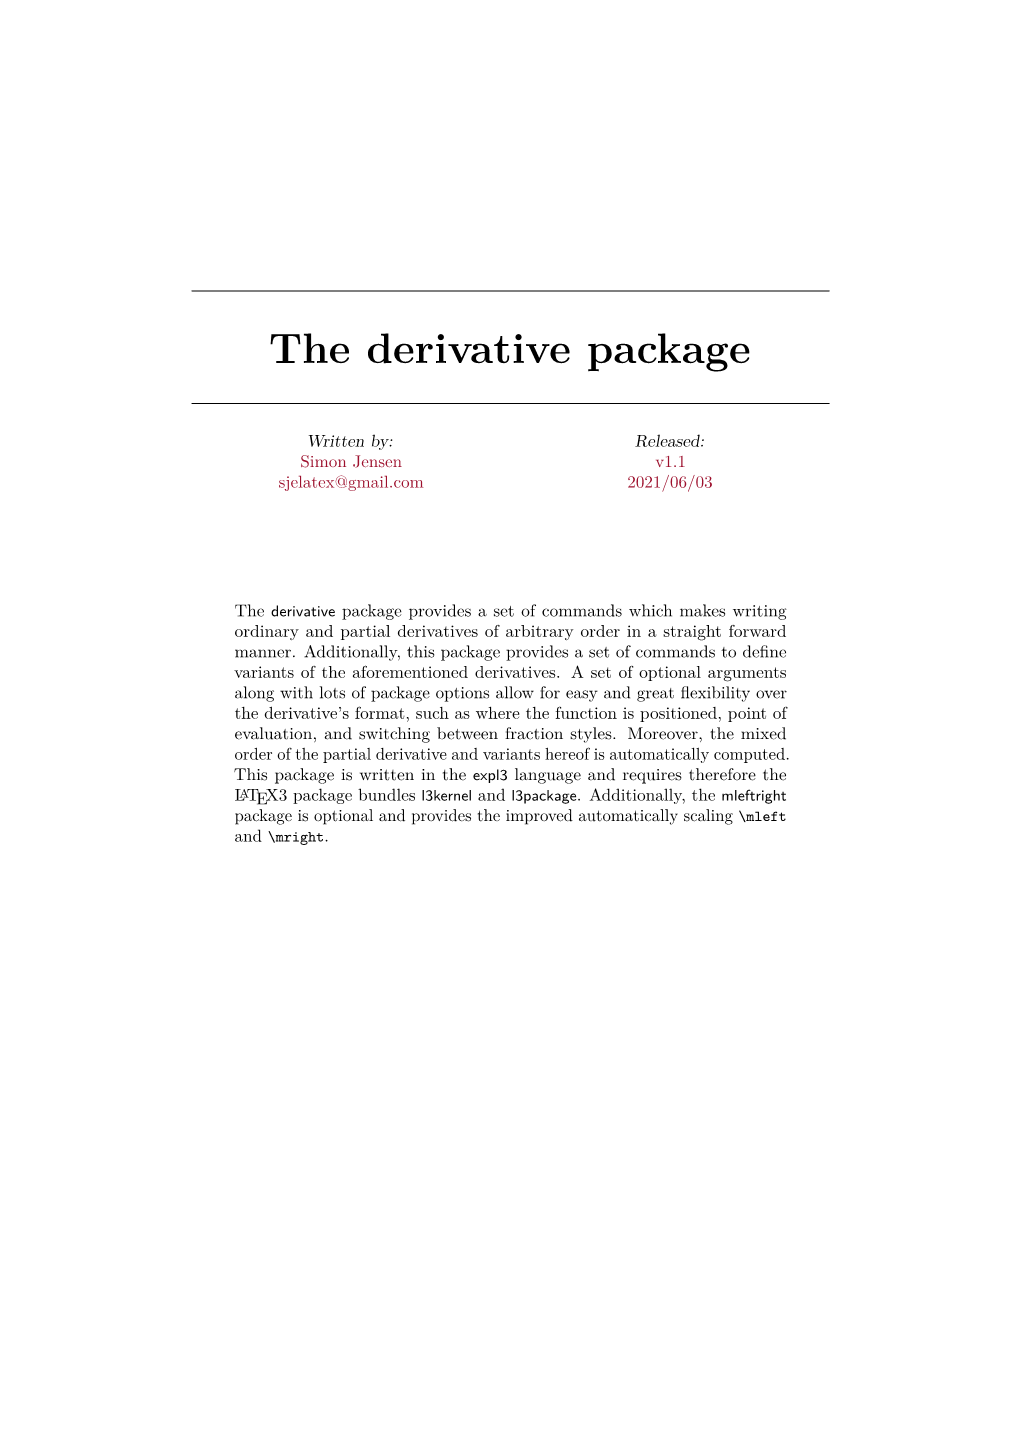 The Derivative Package